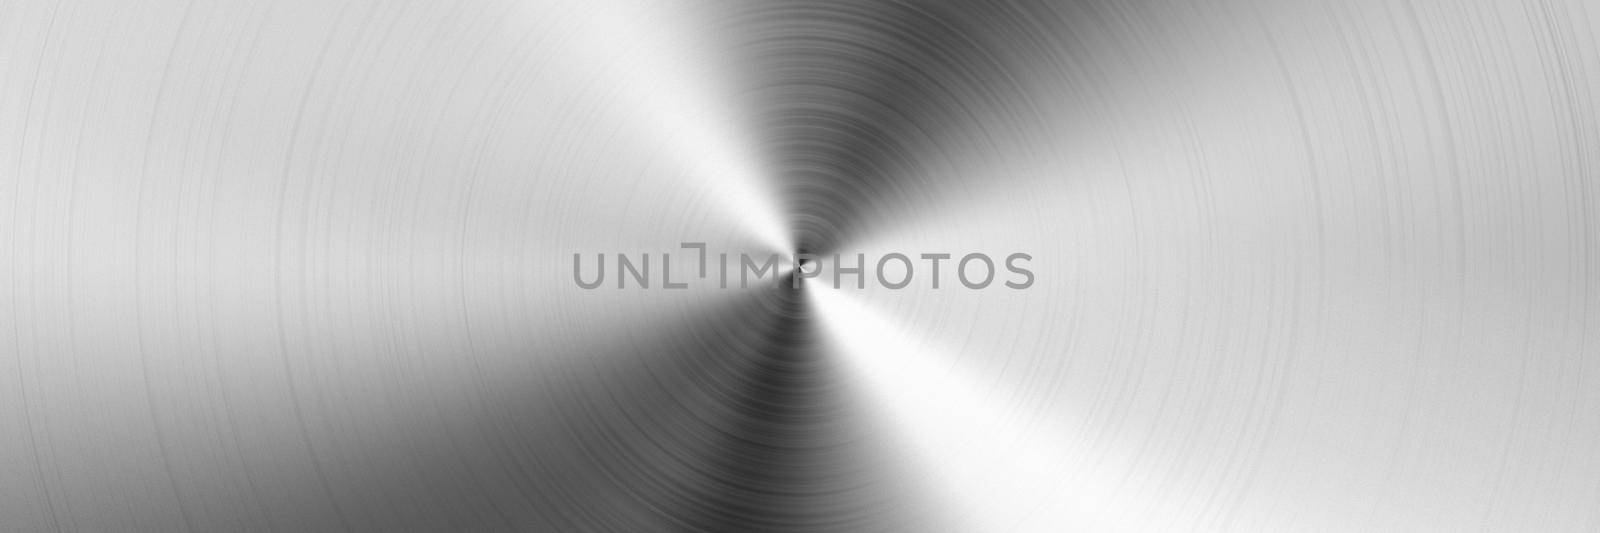 Abstract industrial background and stainless steel texture. 3d rendering